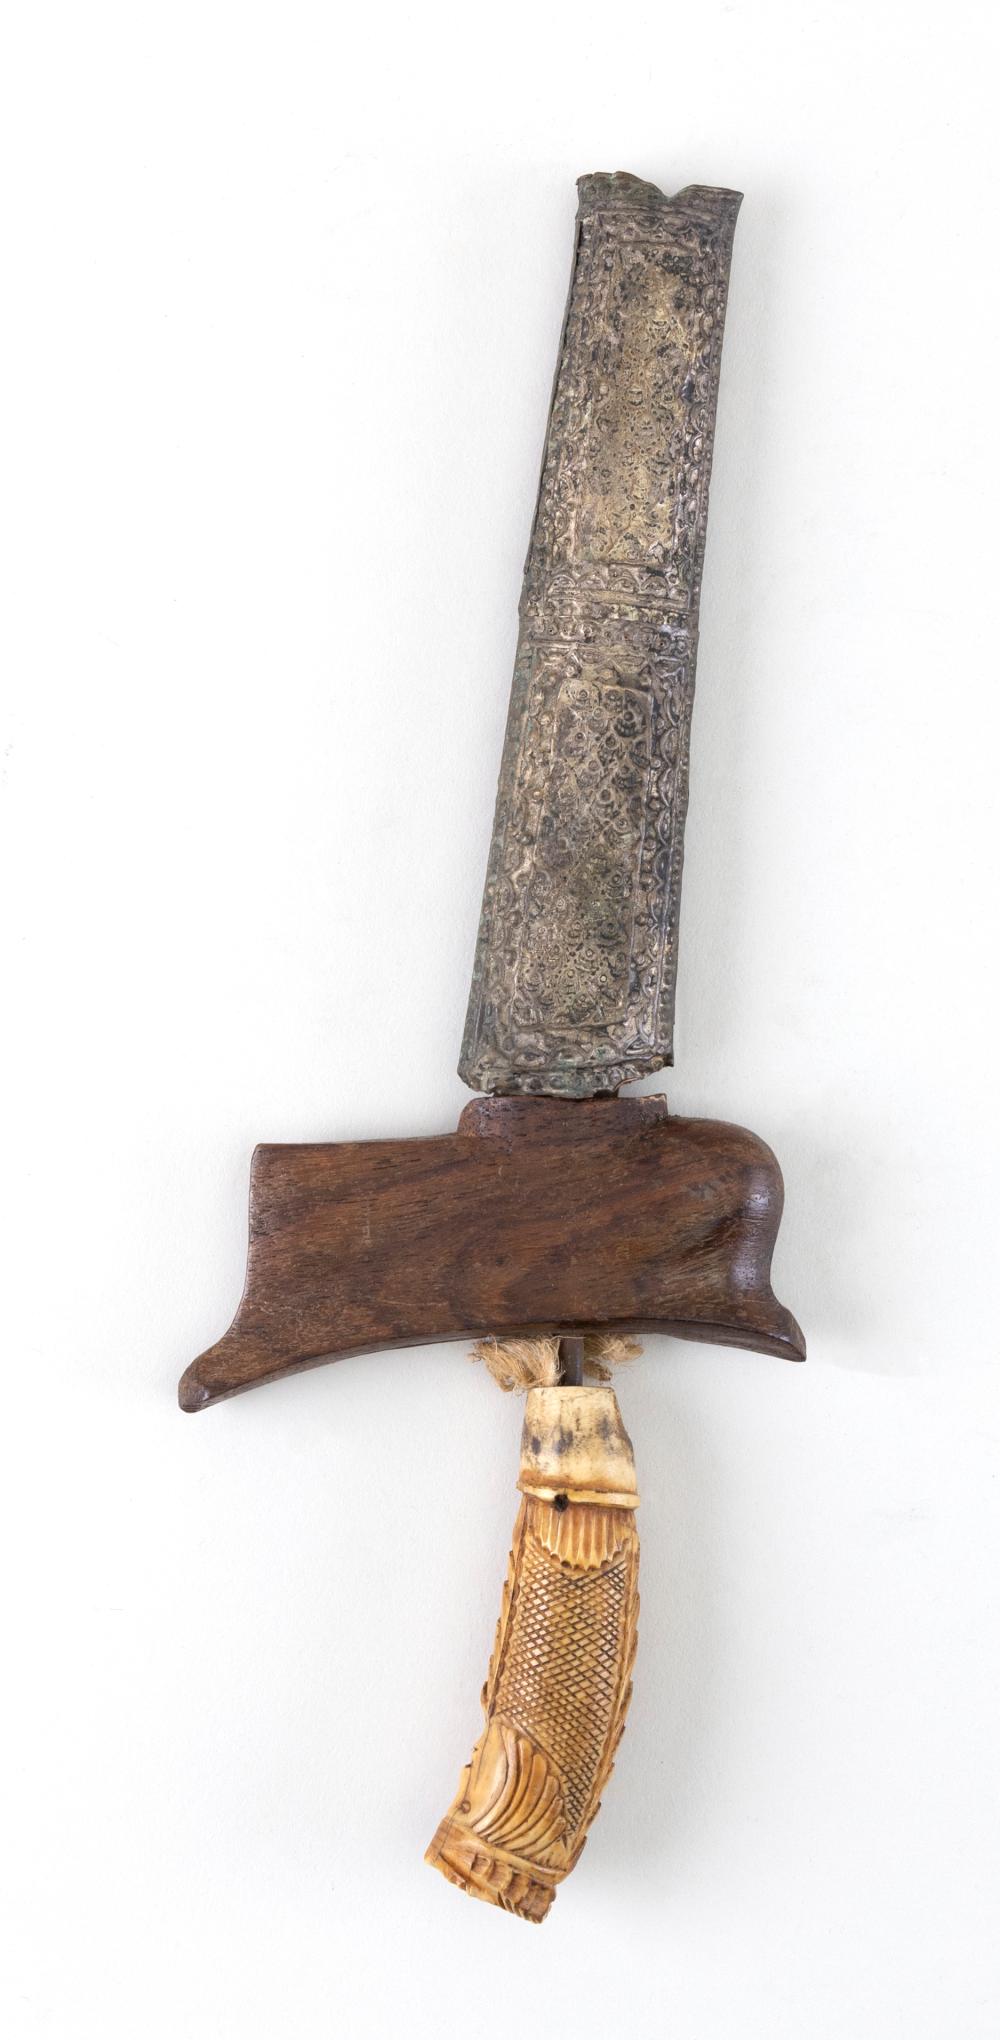 INDONESIAN KRIS WITH SCABBARD LATE 34e15c